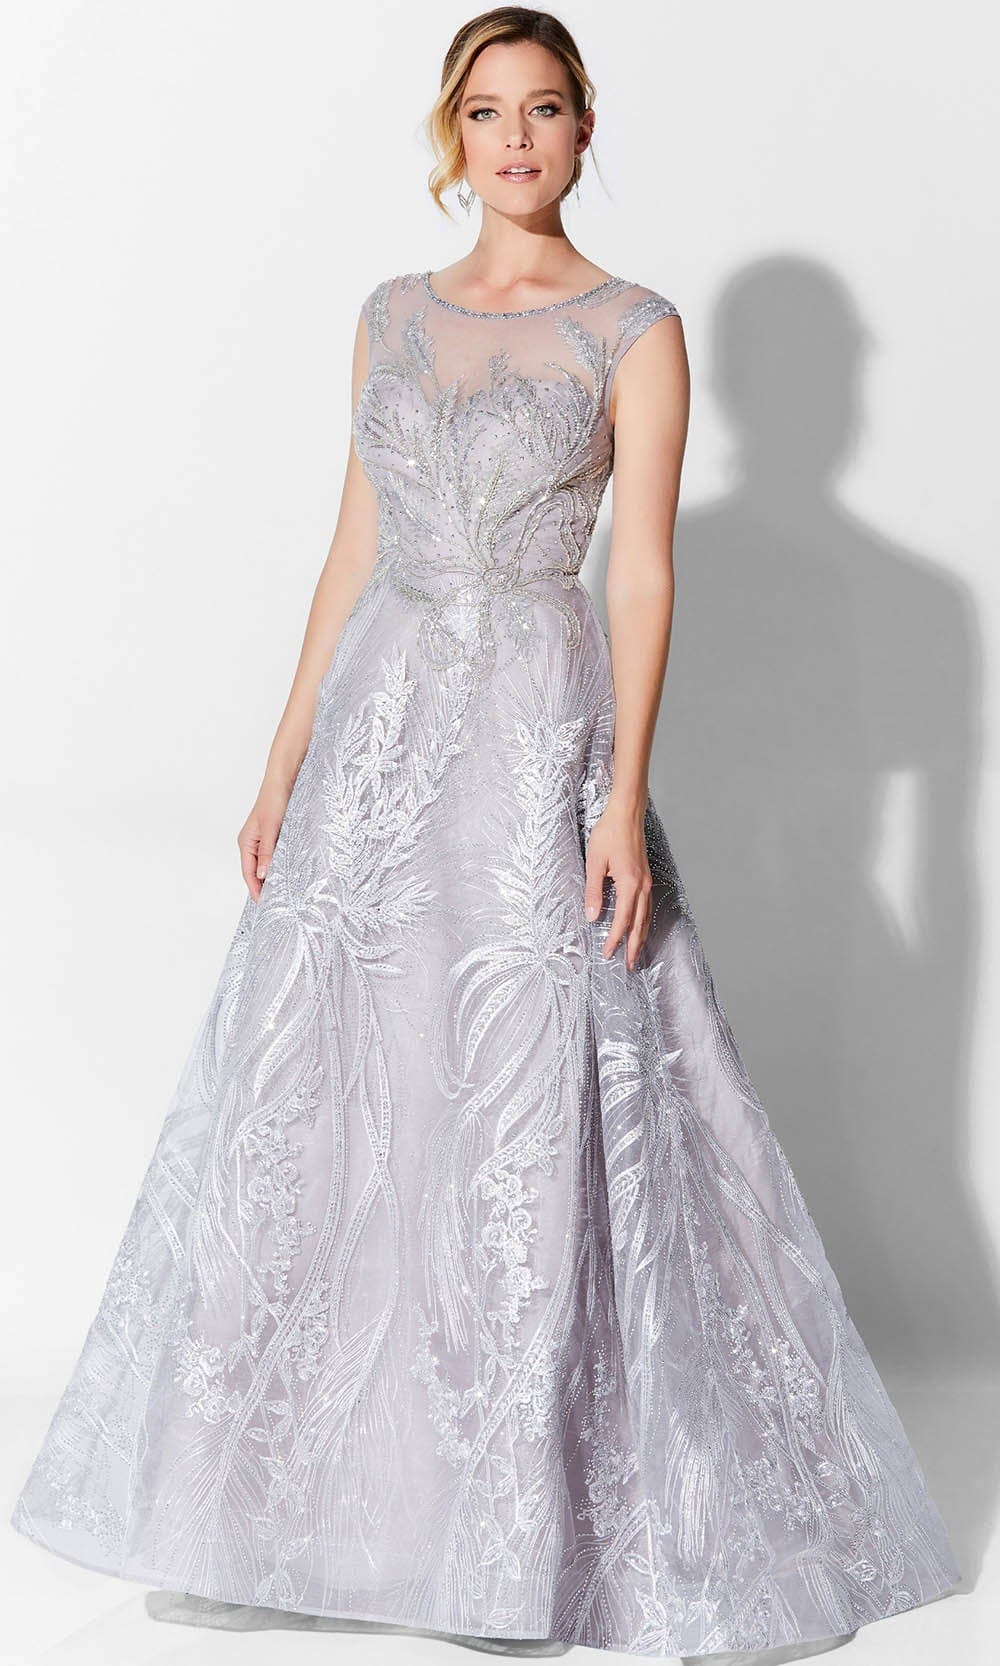 Ivonne D 122D61 - Embroidered Tulle Evening Gown
